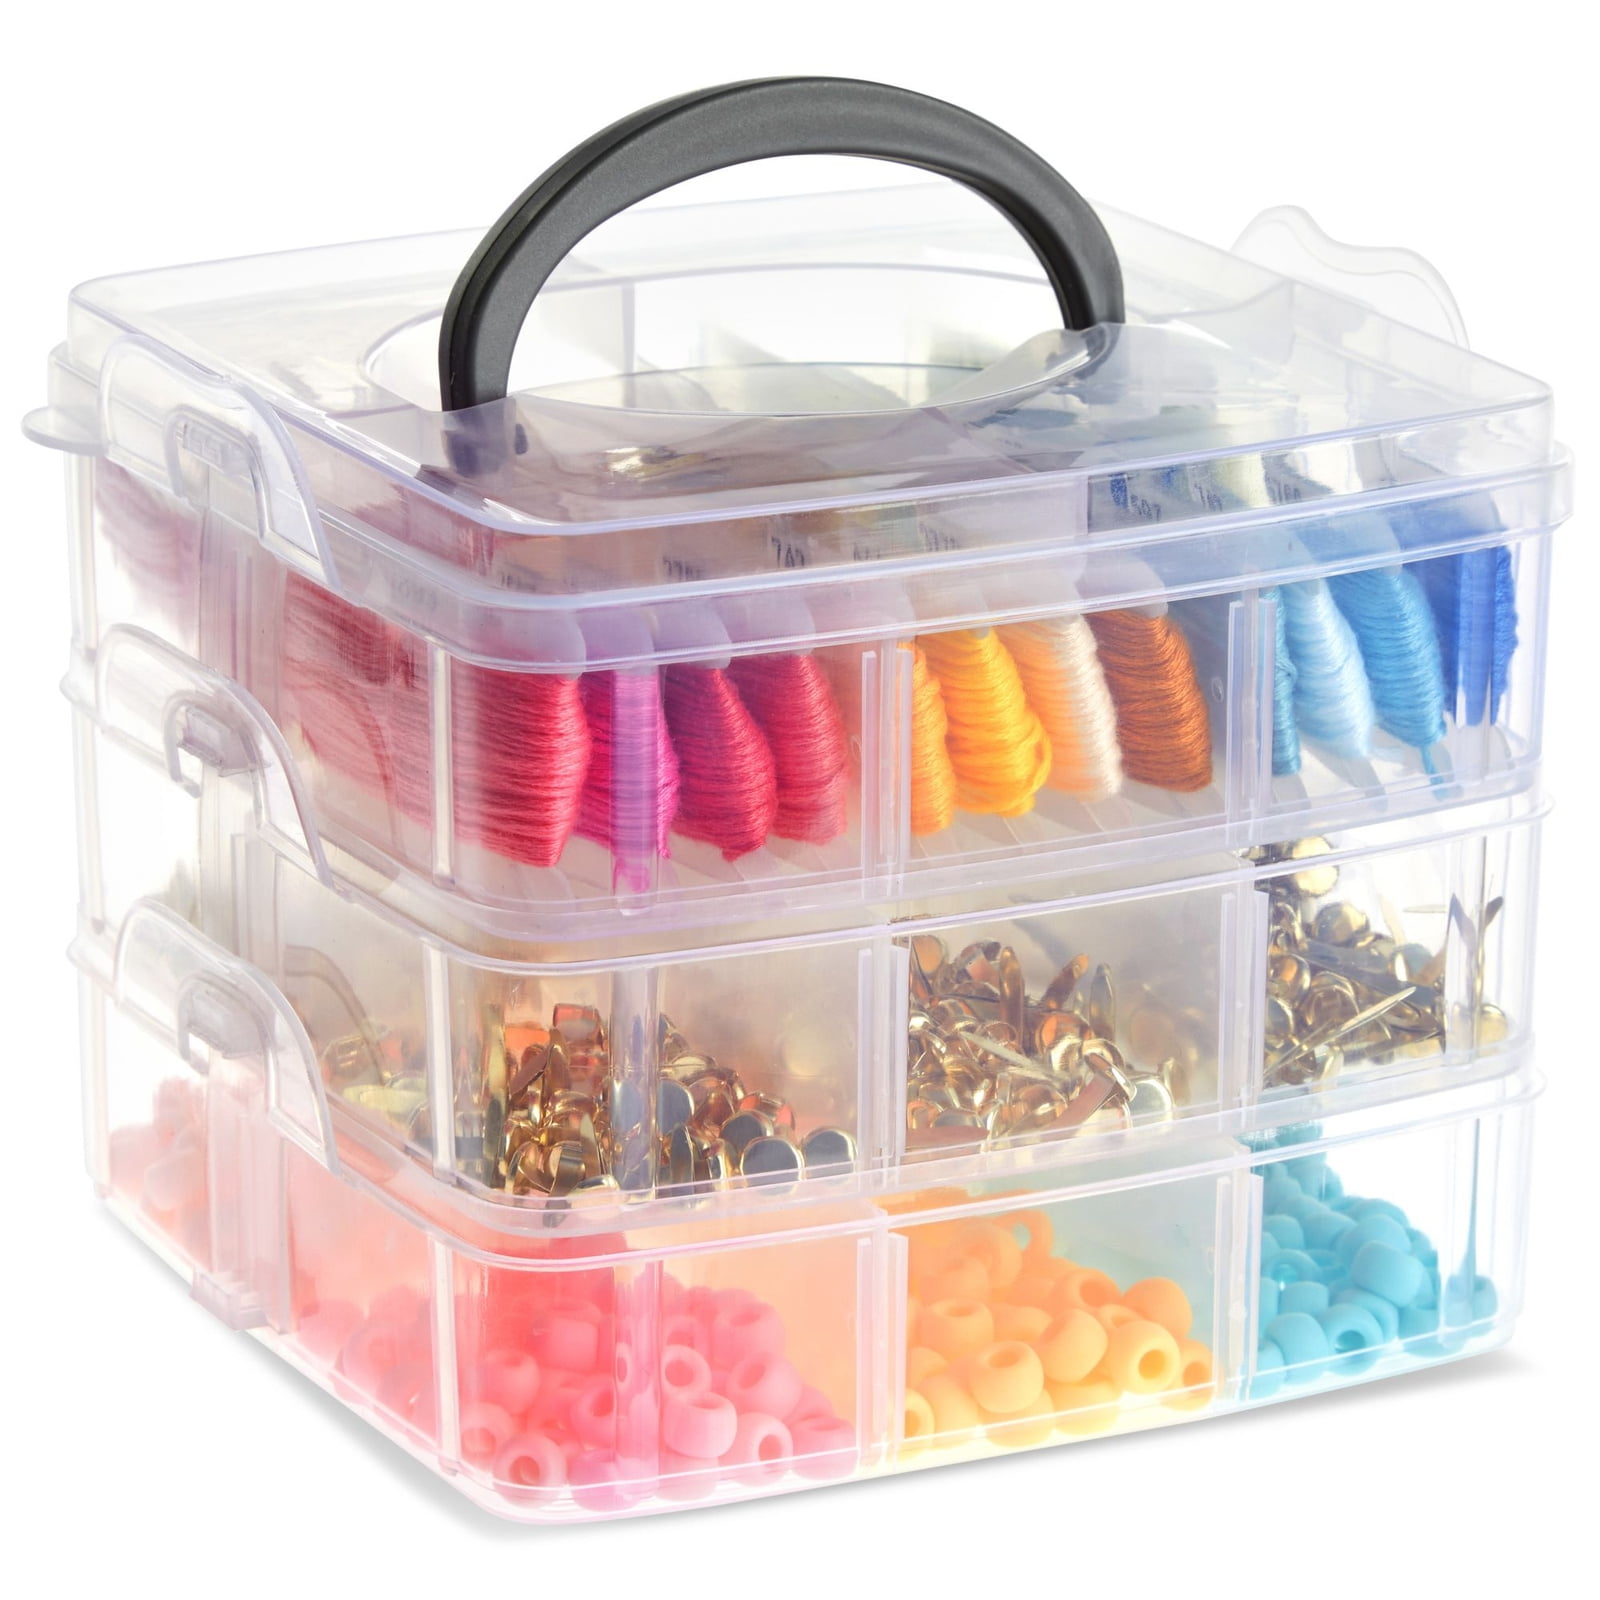 CraftMedley 3 Layer Stack and Carry Box, Plastic Multipurpose Portable  Storage Container Tote with Handle - Organize Crafts, Beads, Buttons,  Sewing 